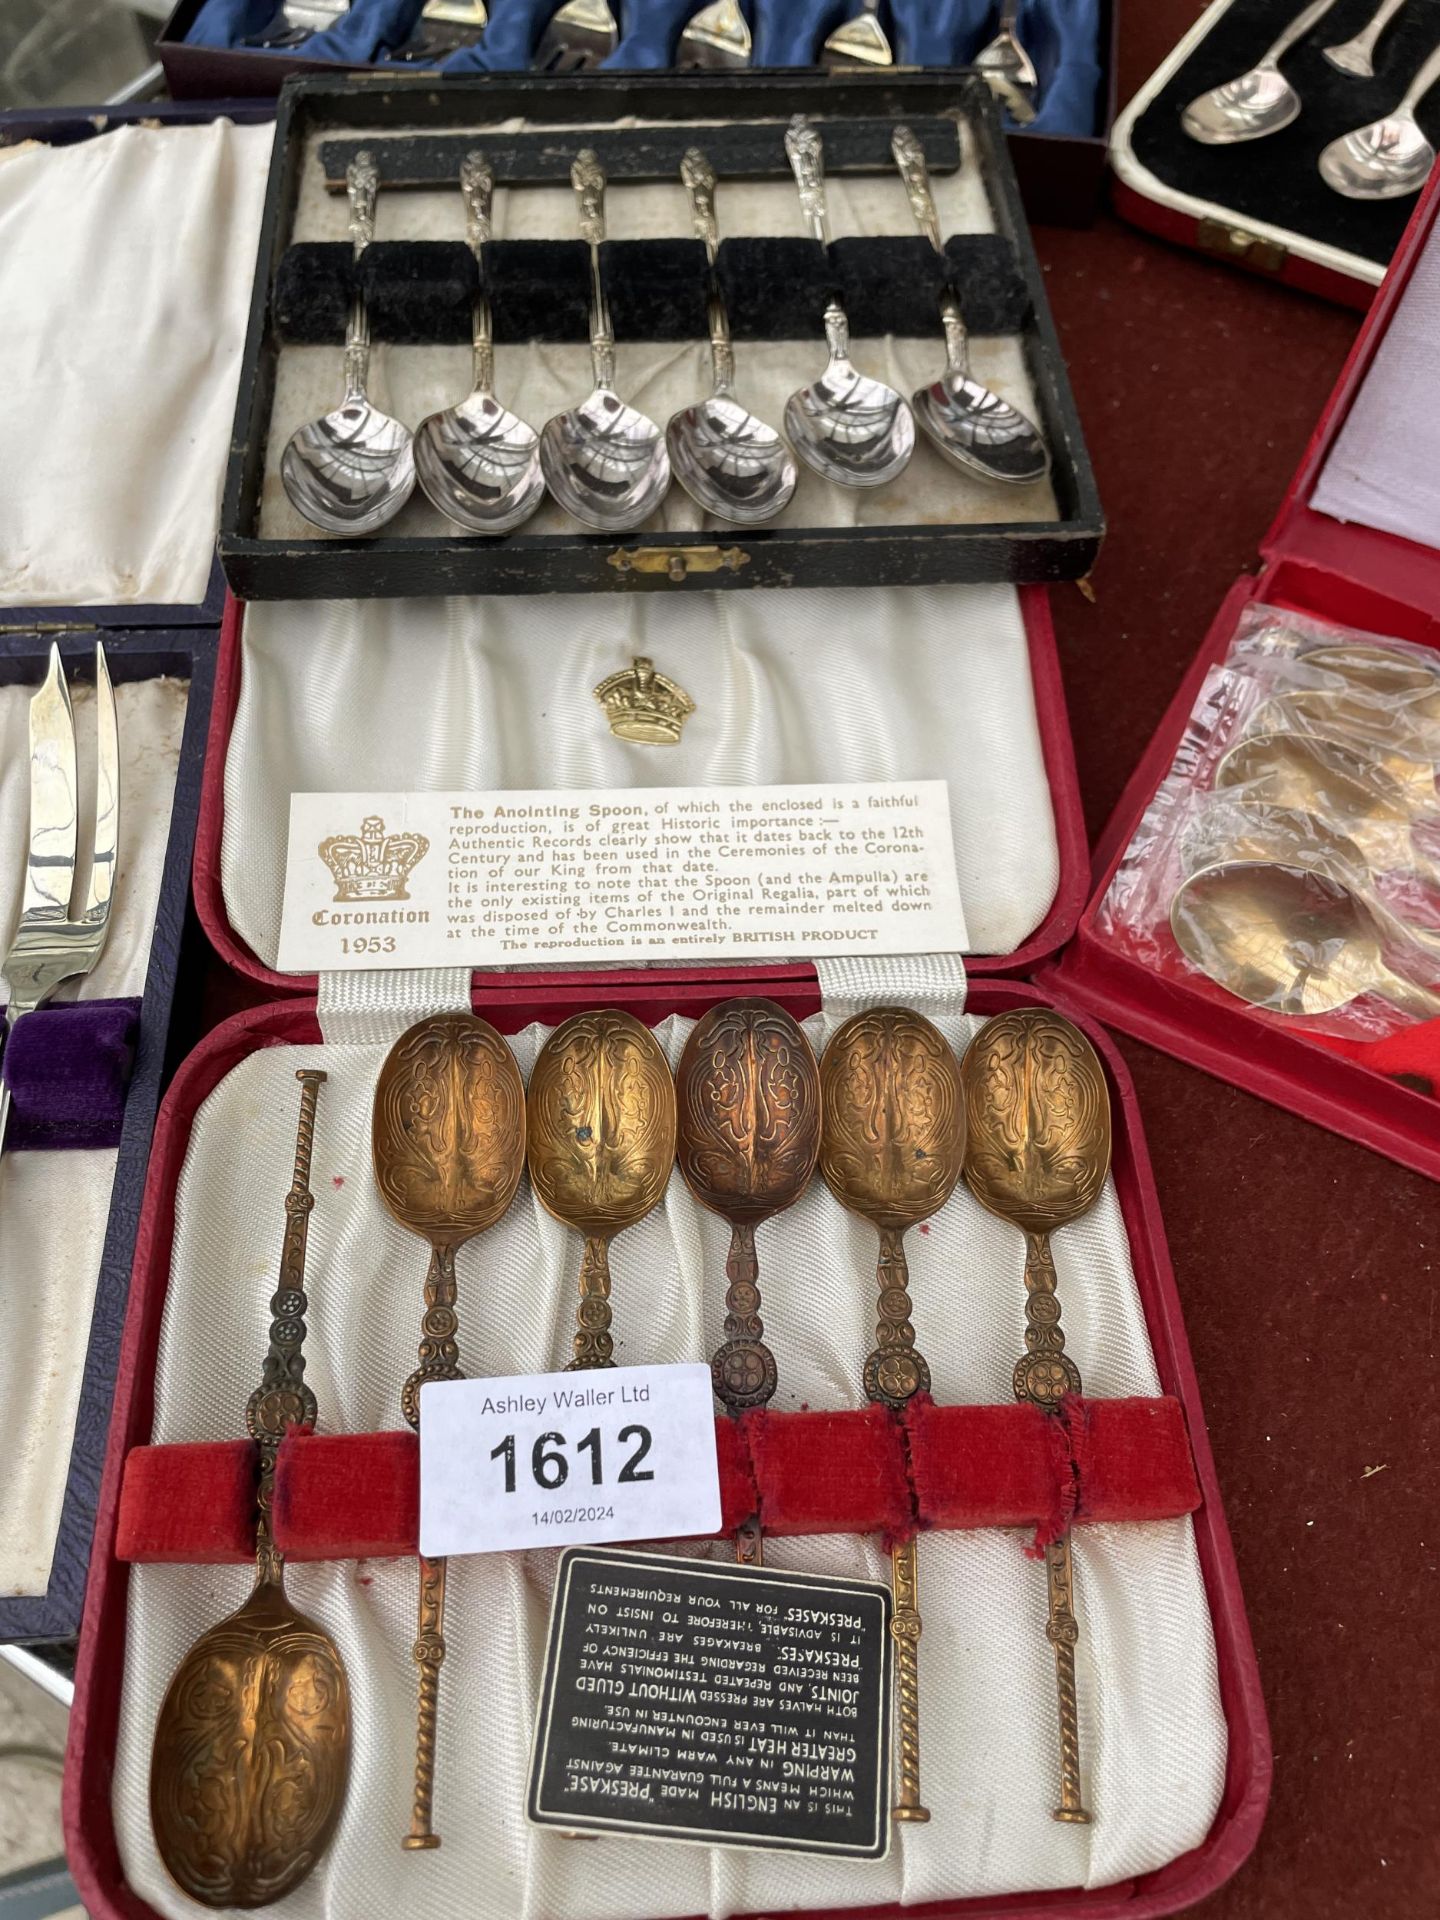 SIX COMPLETE SETS OF CASED FLATWARE TO INCLUDE ANOINTING SPOONS, TEASPOONS AND CAKE FORKS ETC - Image 2 of 5